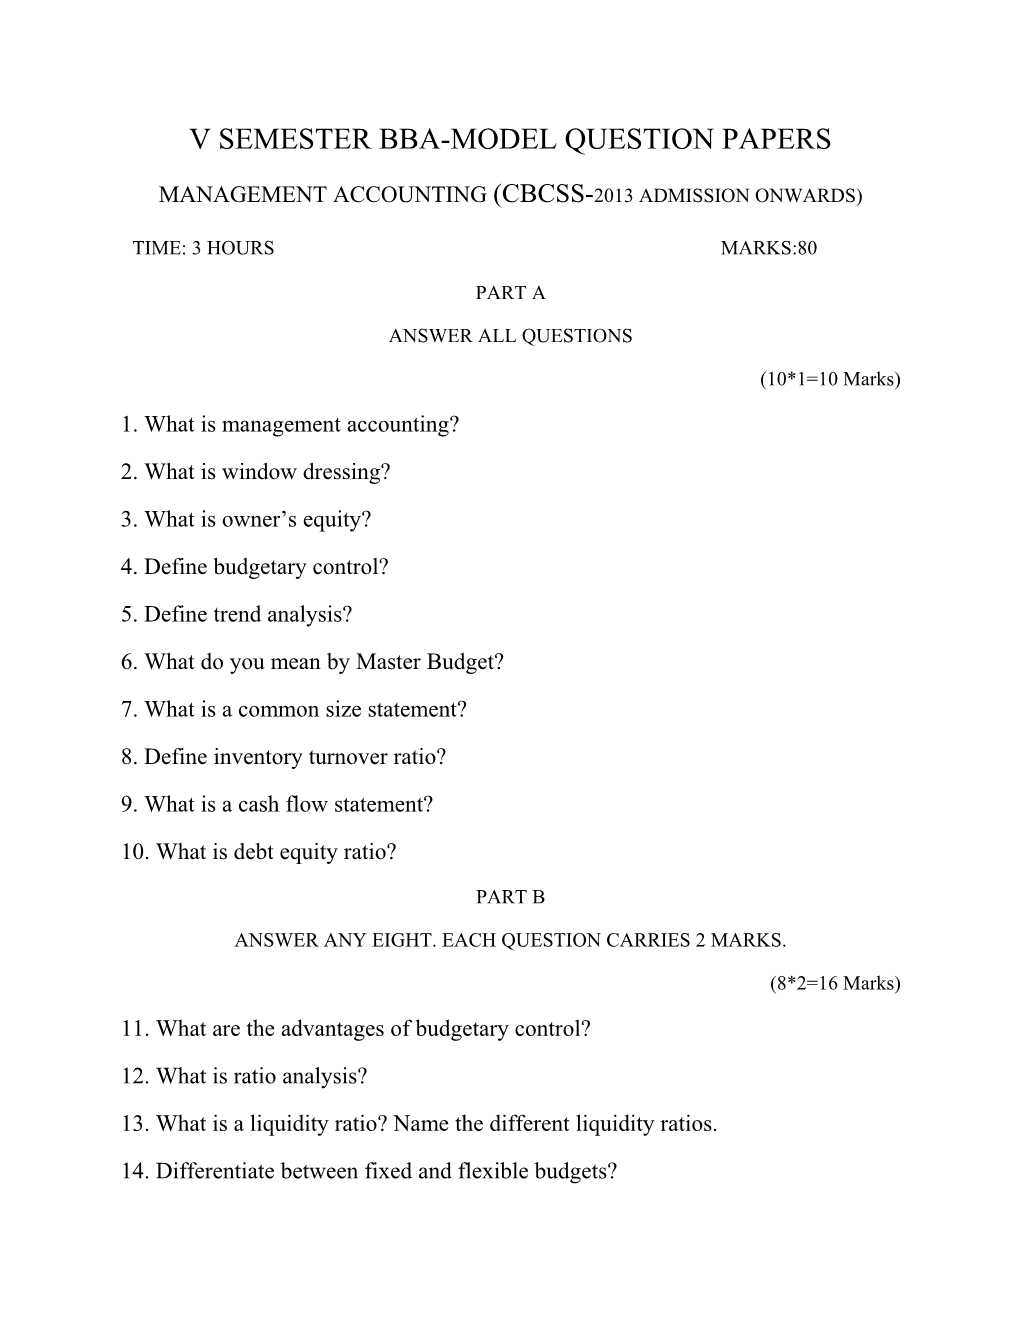 V Semester Bba-Model Question Papers